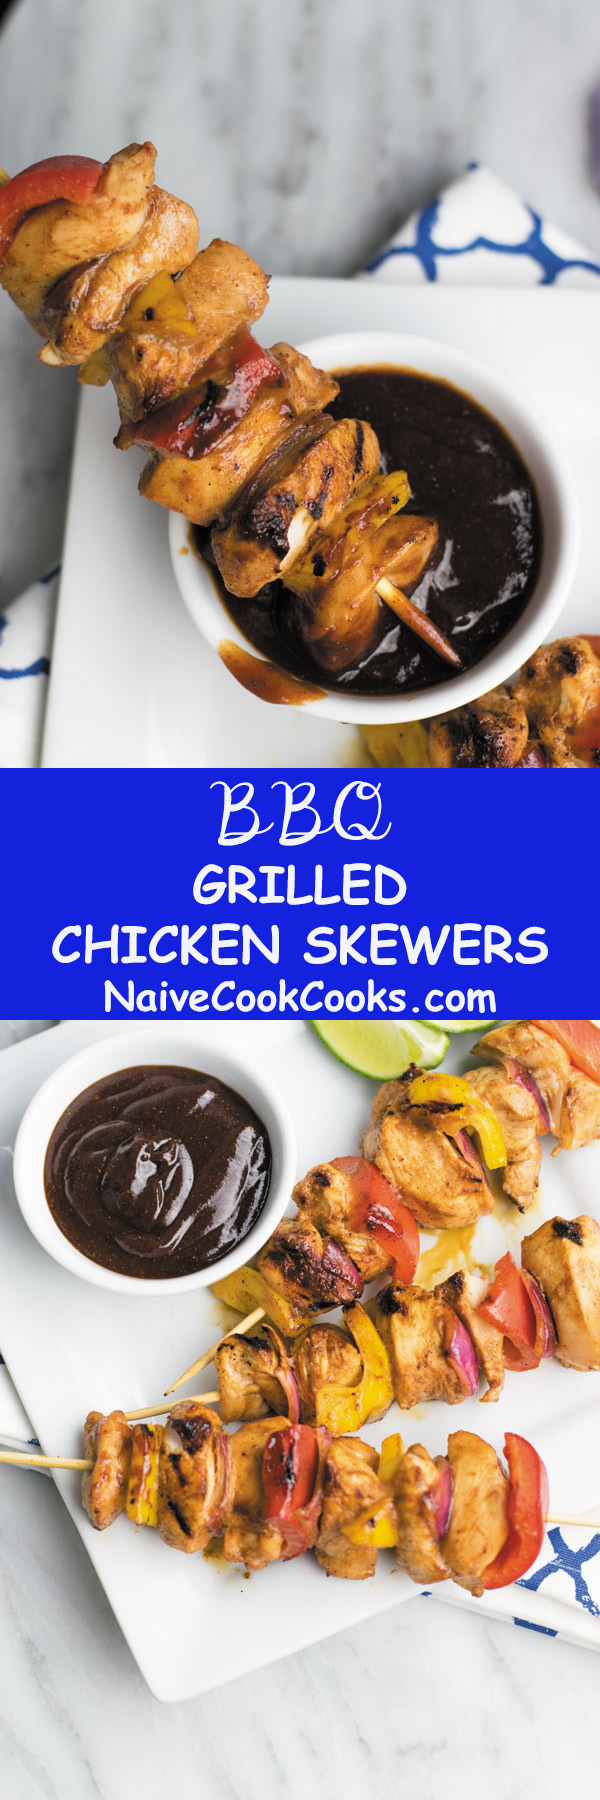 bbq grilled chicken skewers long pin